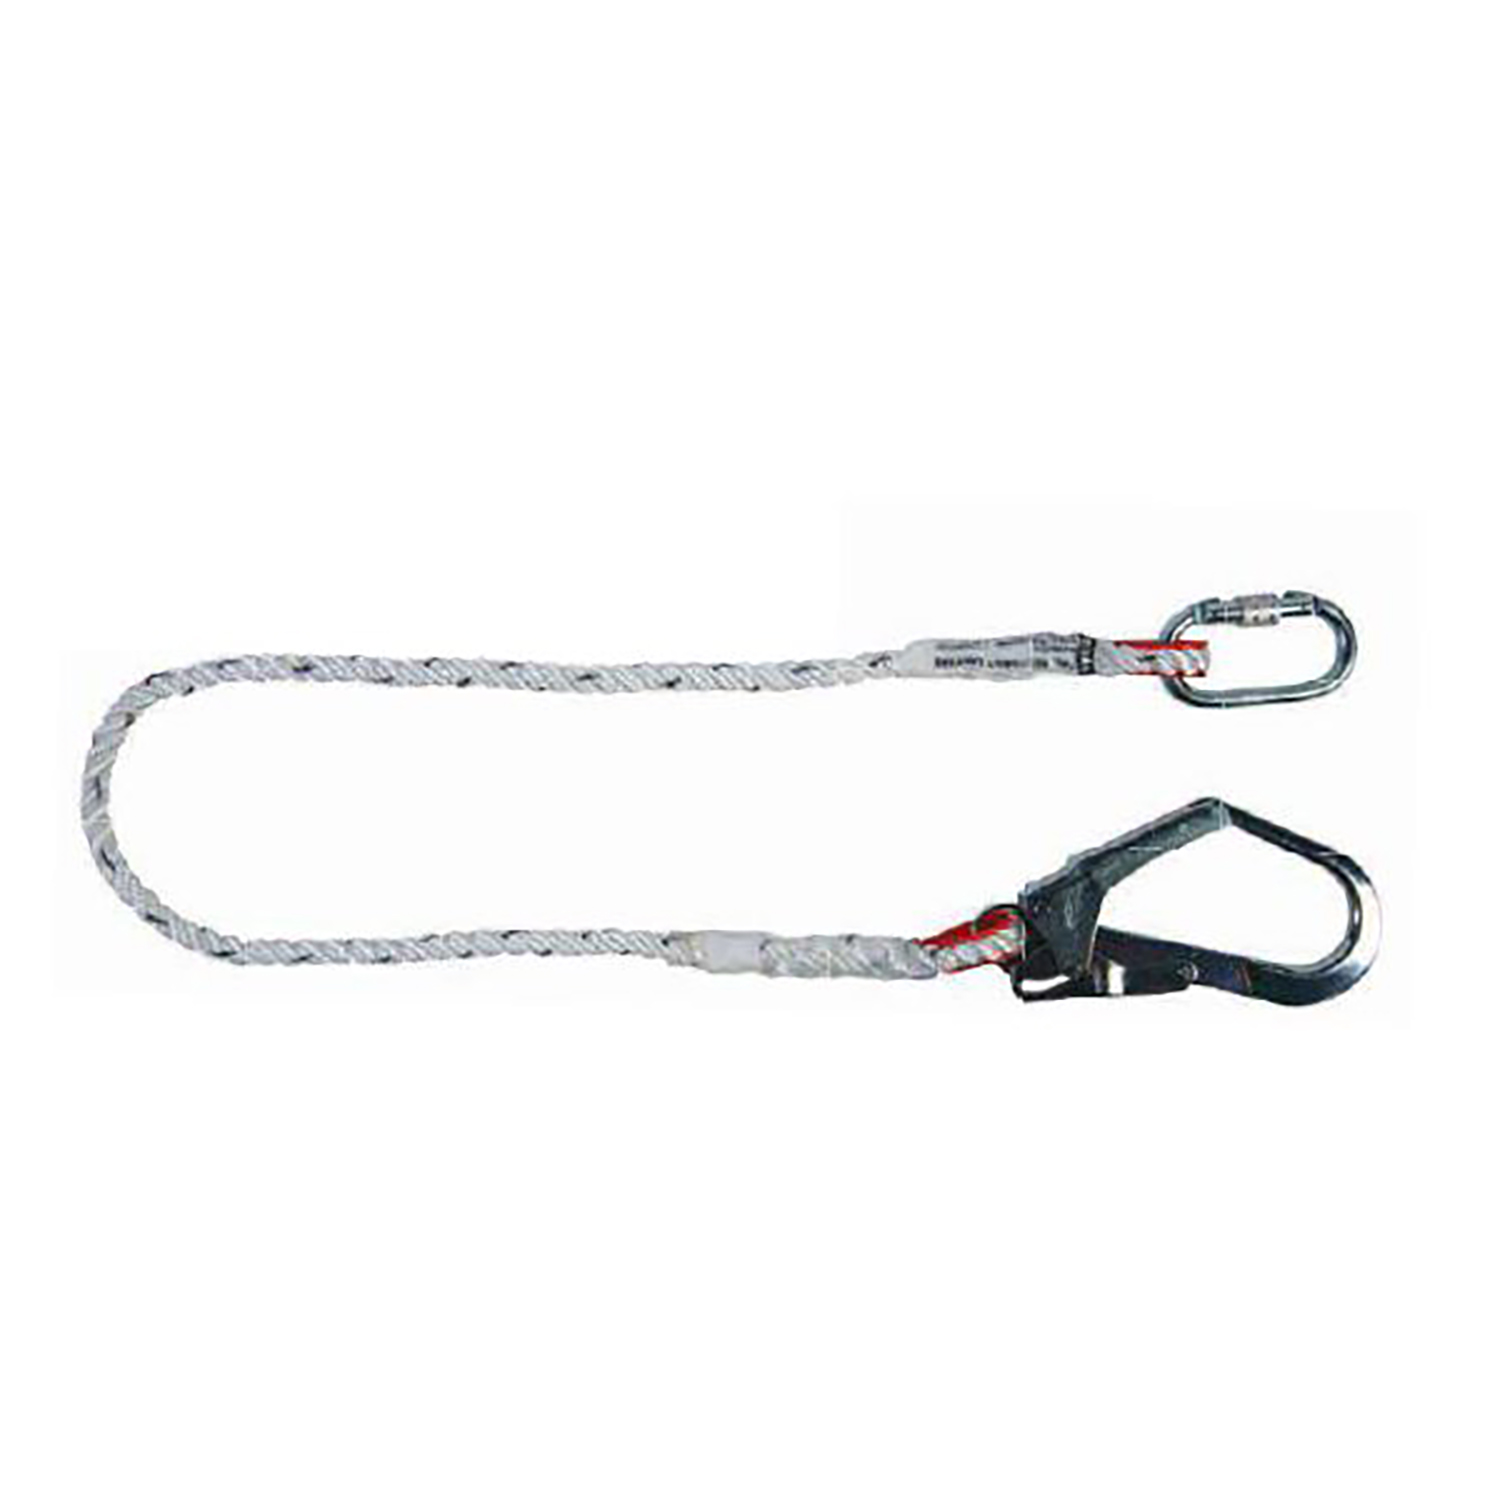 Safety Lanyard with Carabiner and Hook